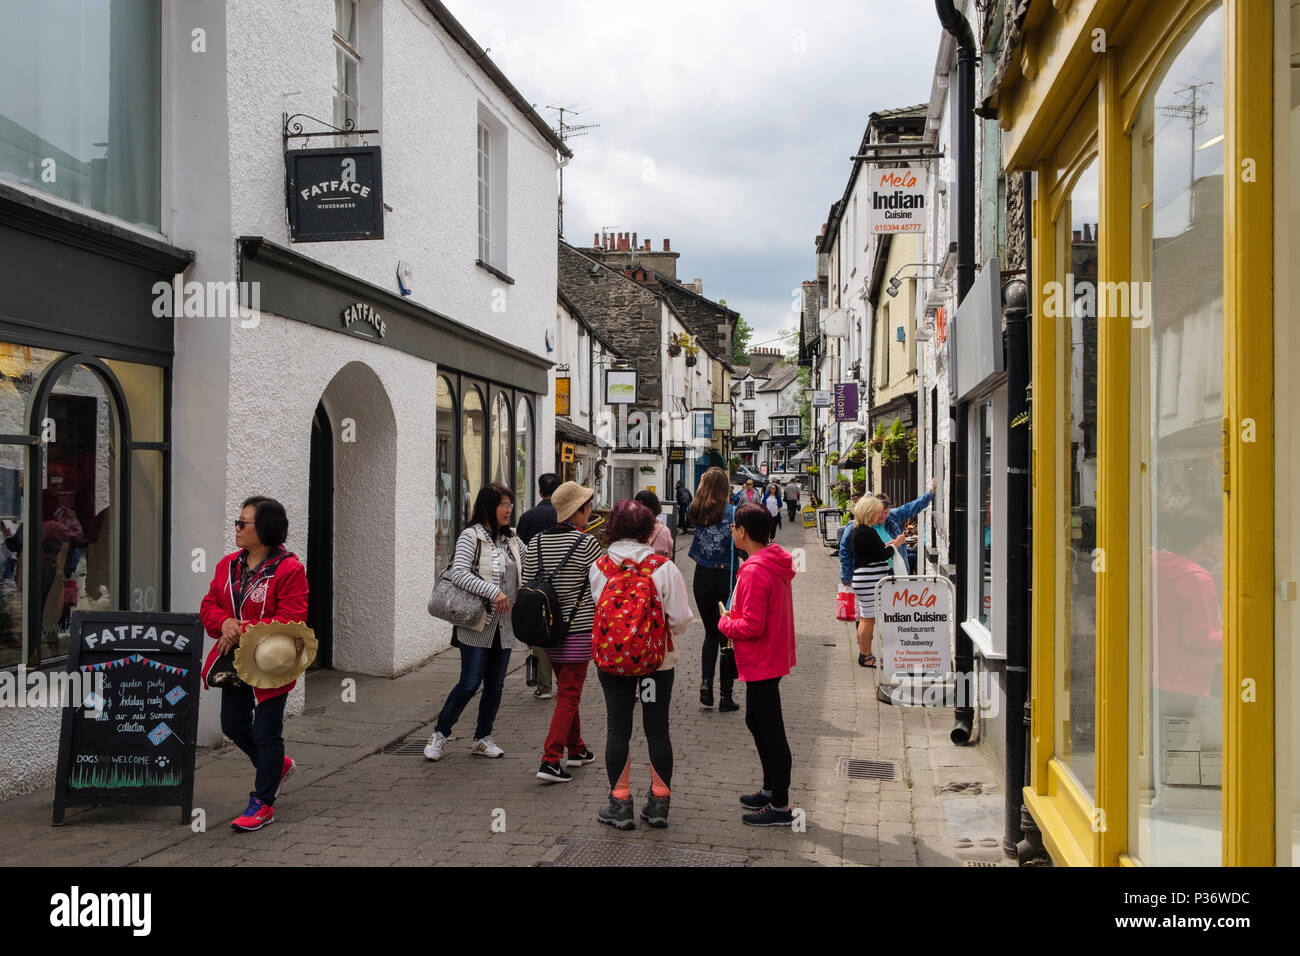 Tourists and shops on narrow street in old Lake District town. Ash Street, Bowness on Windermere, Cumbria, England, UK, Britain Stock Photo